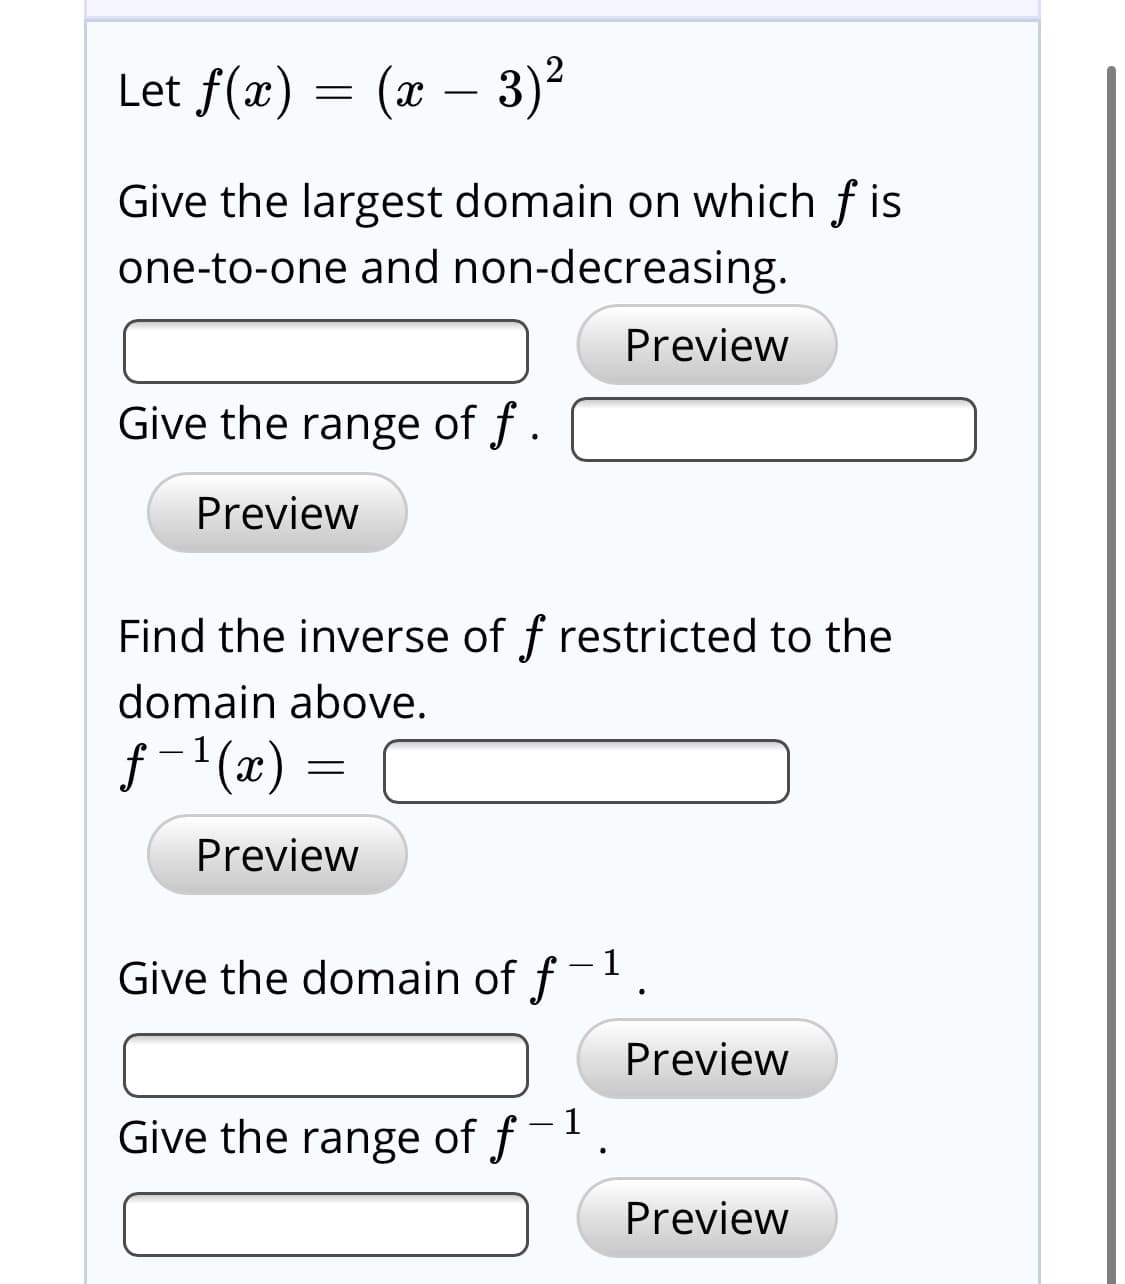 Let f(x) = (x – 3)2
Give the largest domain on which f is
one-to-one and non-decreasing.
Preview
Give the range of f .
Preview
Find the inverse of f restricted to the
domain above.
f-'(x) =
Preview
Give the domain of f-1
Preview
Give the range of f-.
Preview
